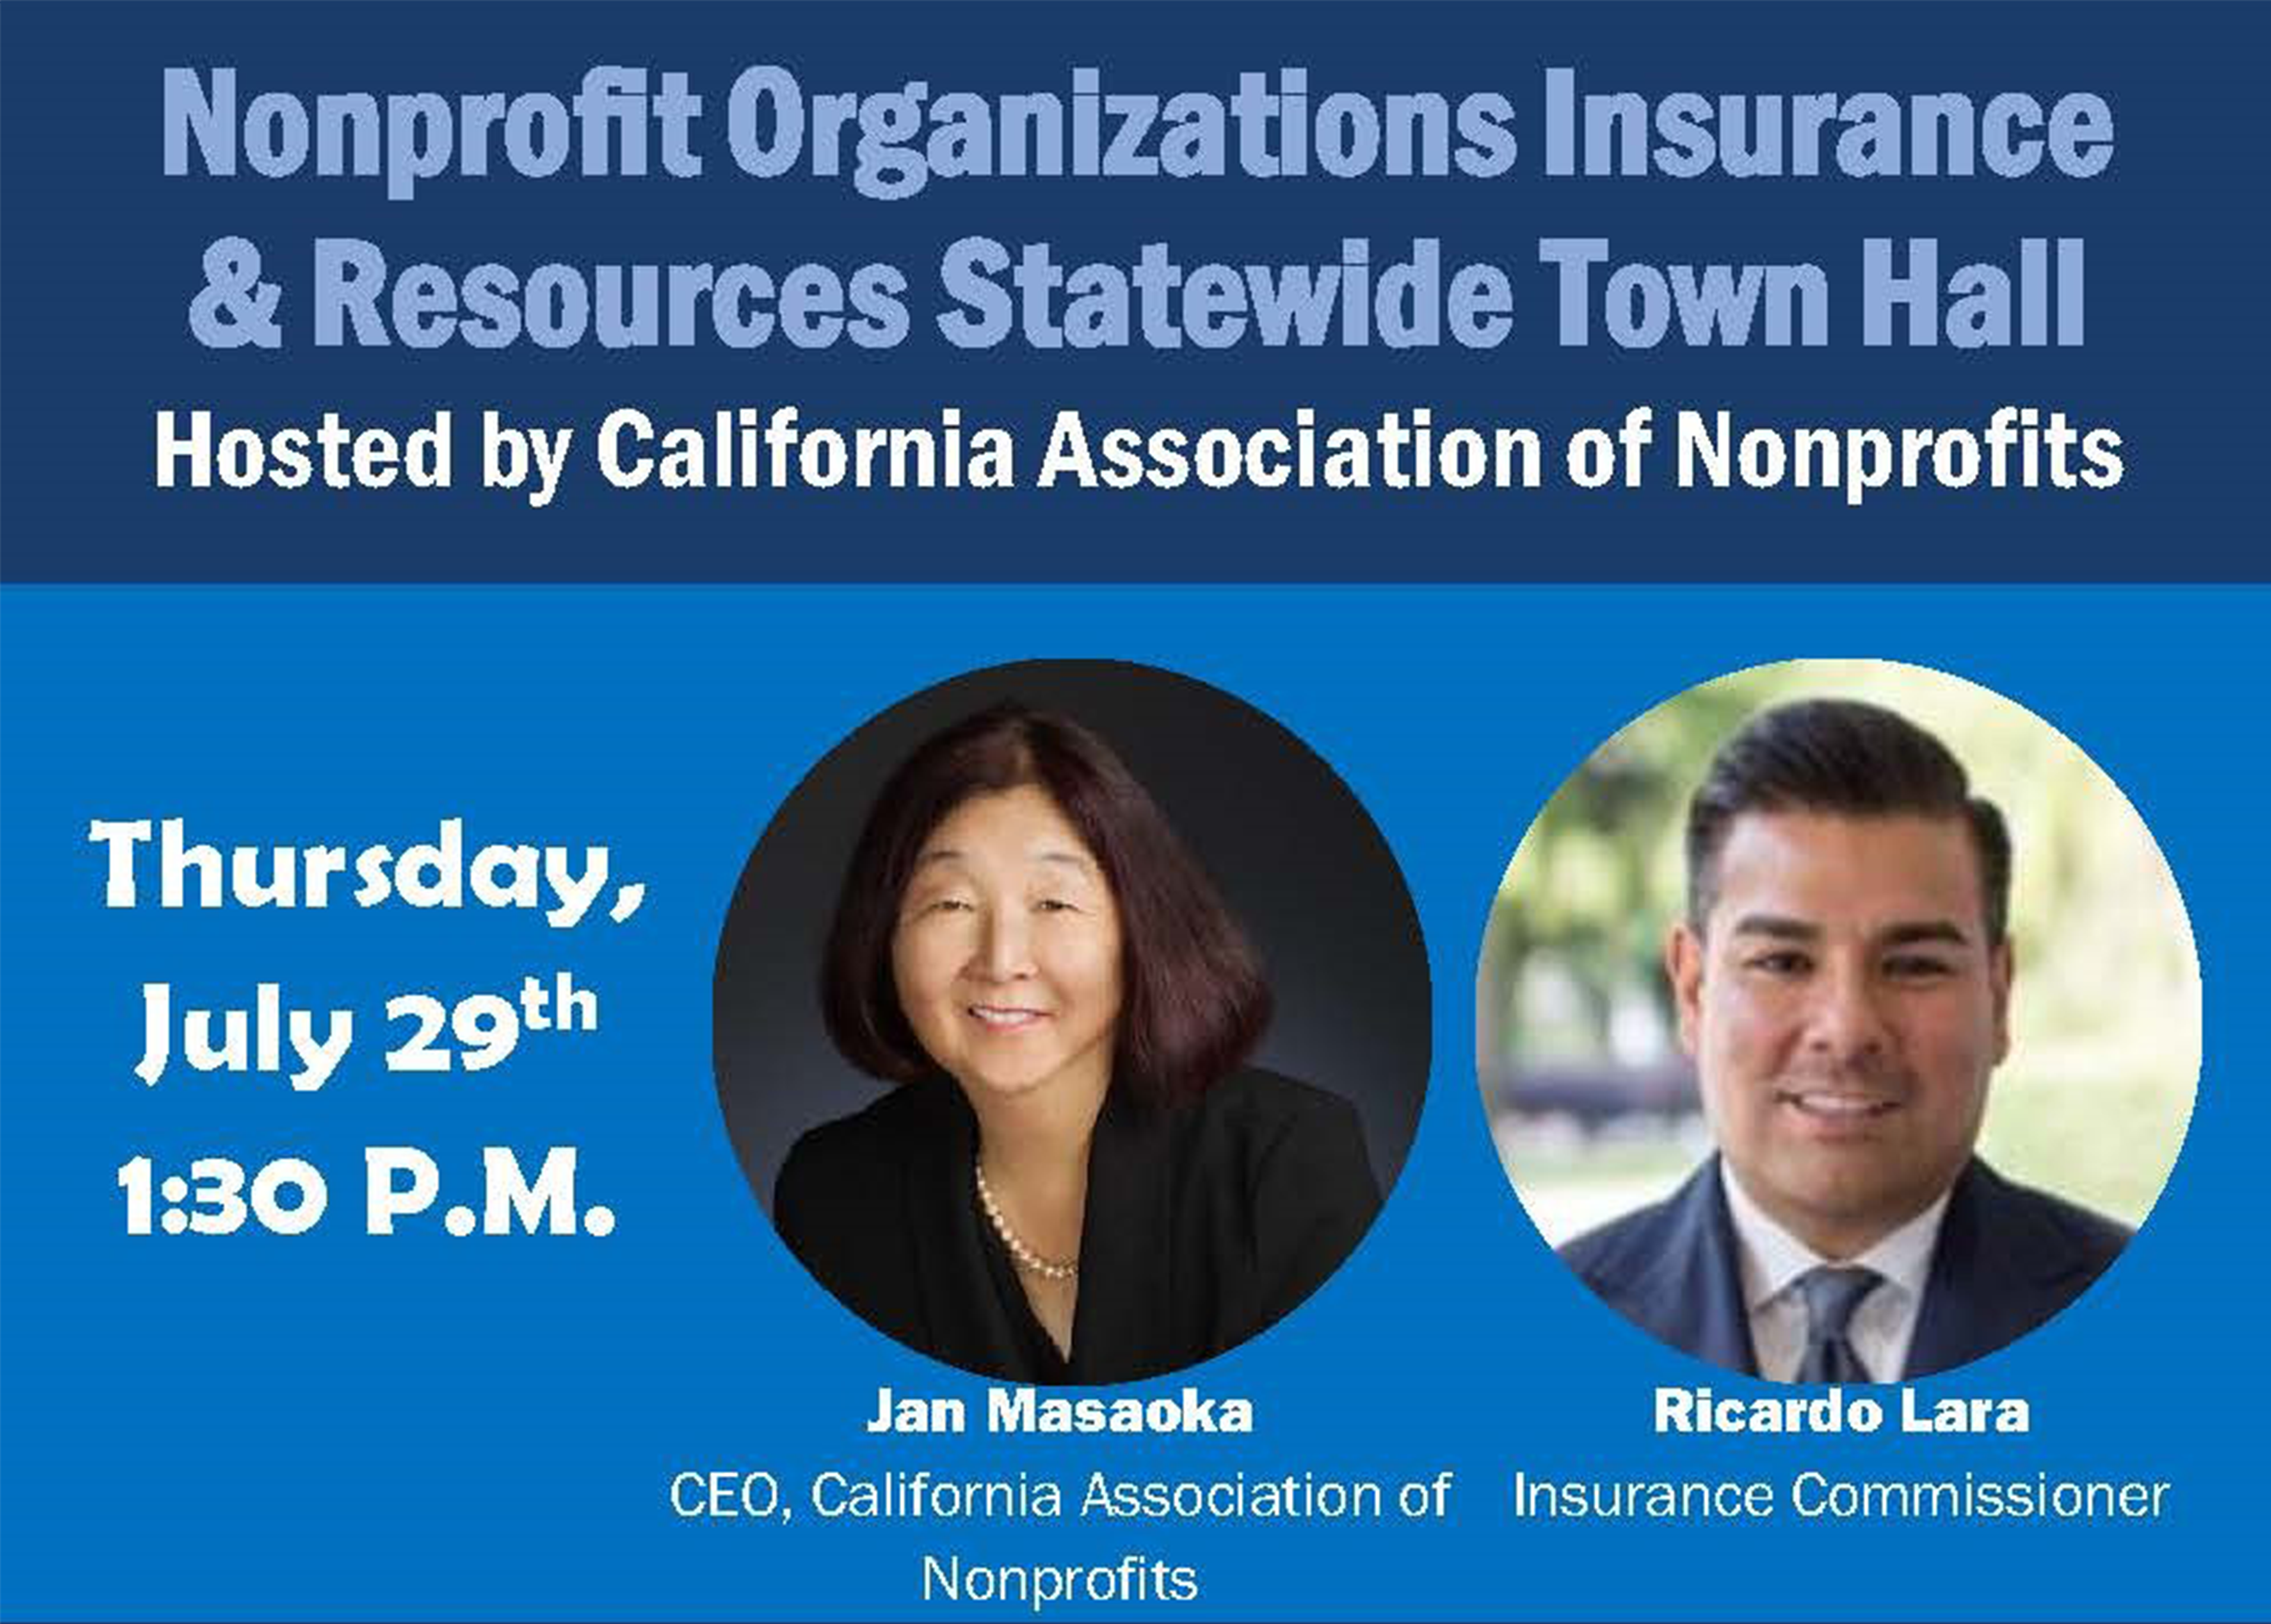 Nonprofit Organizations Insurance &amp; Resources Statewide Town Hall Hosted by California Association of Nonprofits  Thursday July 29th, 1:30 PM  Jan Masaoka, CEO California Association of Nonprofits  Ricardo Lara, Insurance Commissioner